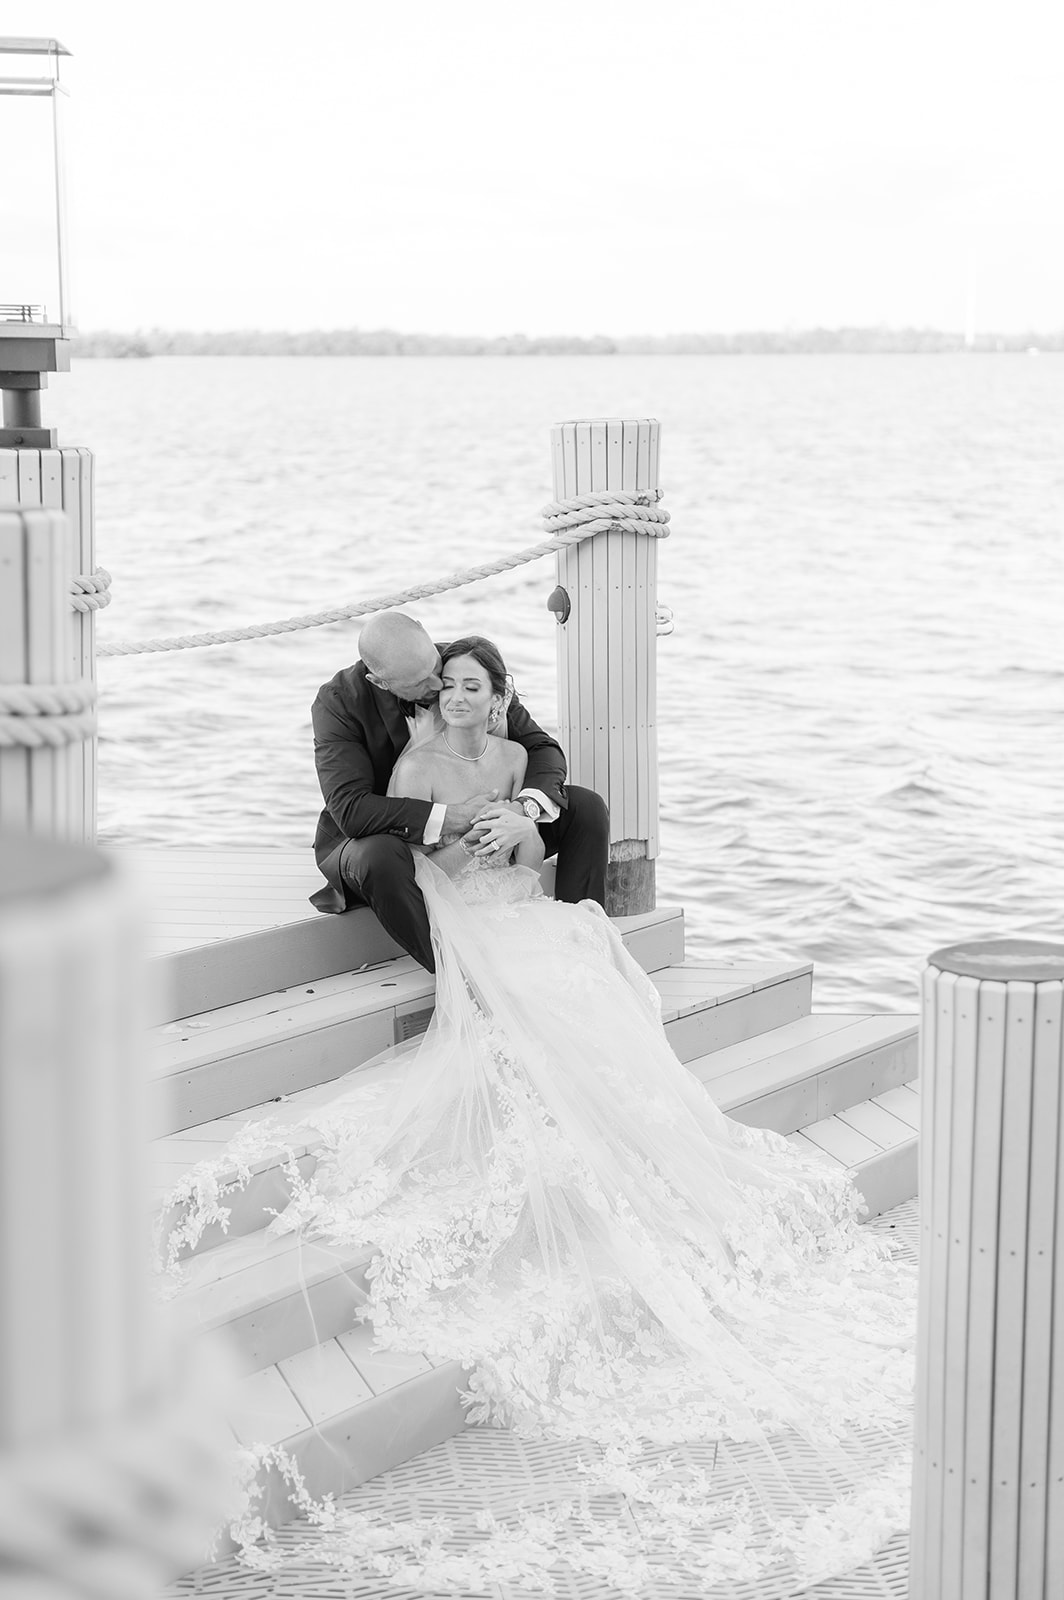 Marco Island Wedding Photography - A Perfect Blend of Creativity and Expertise
